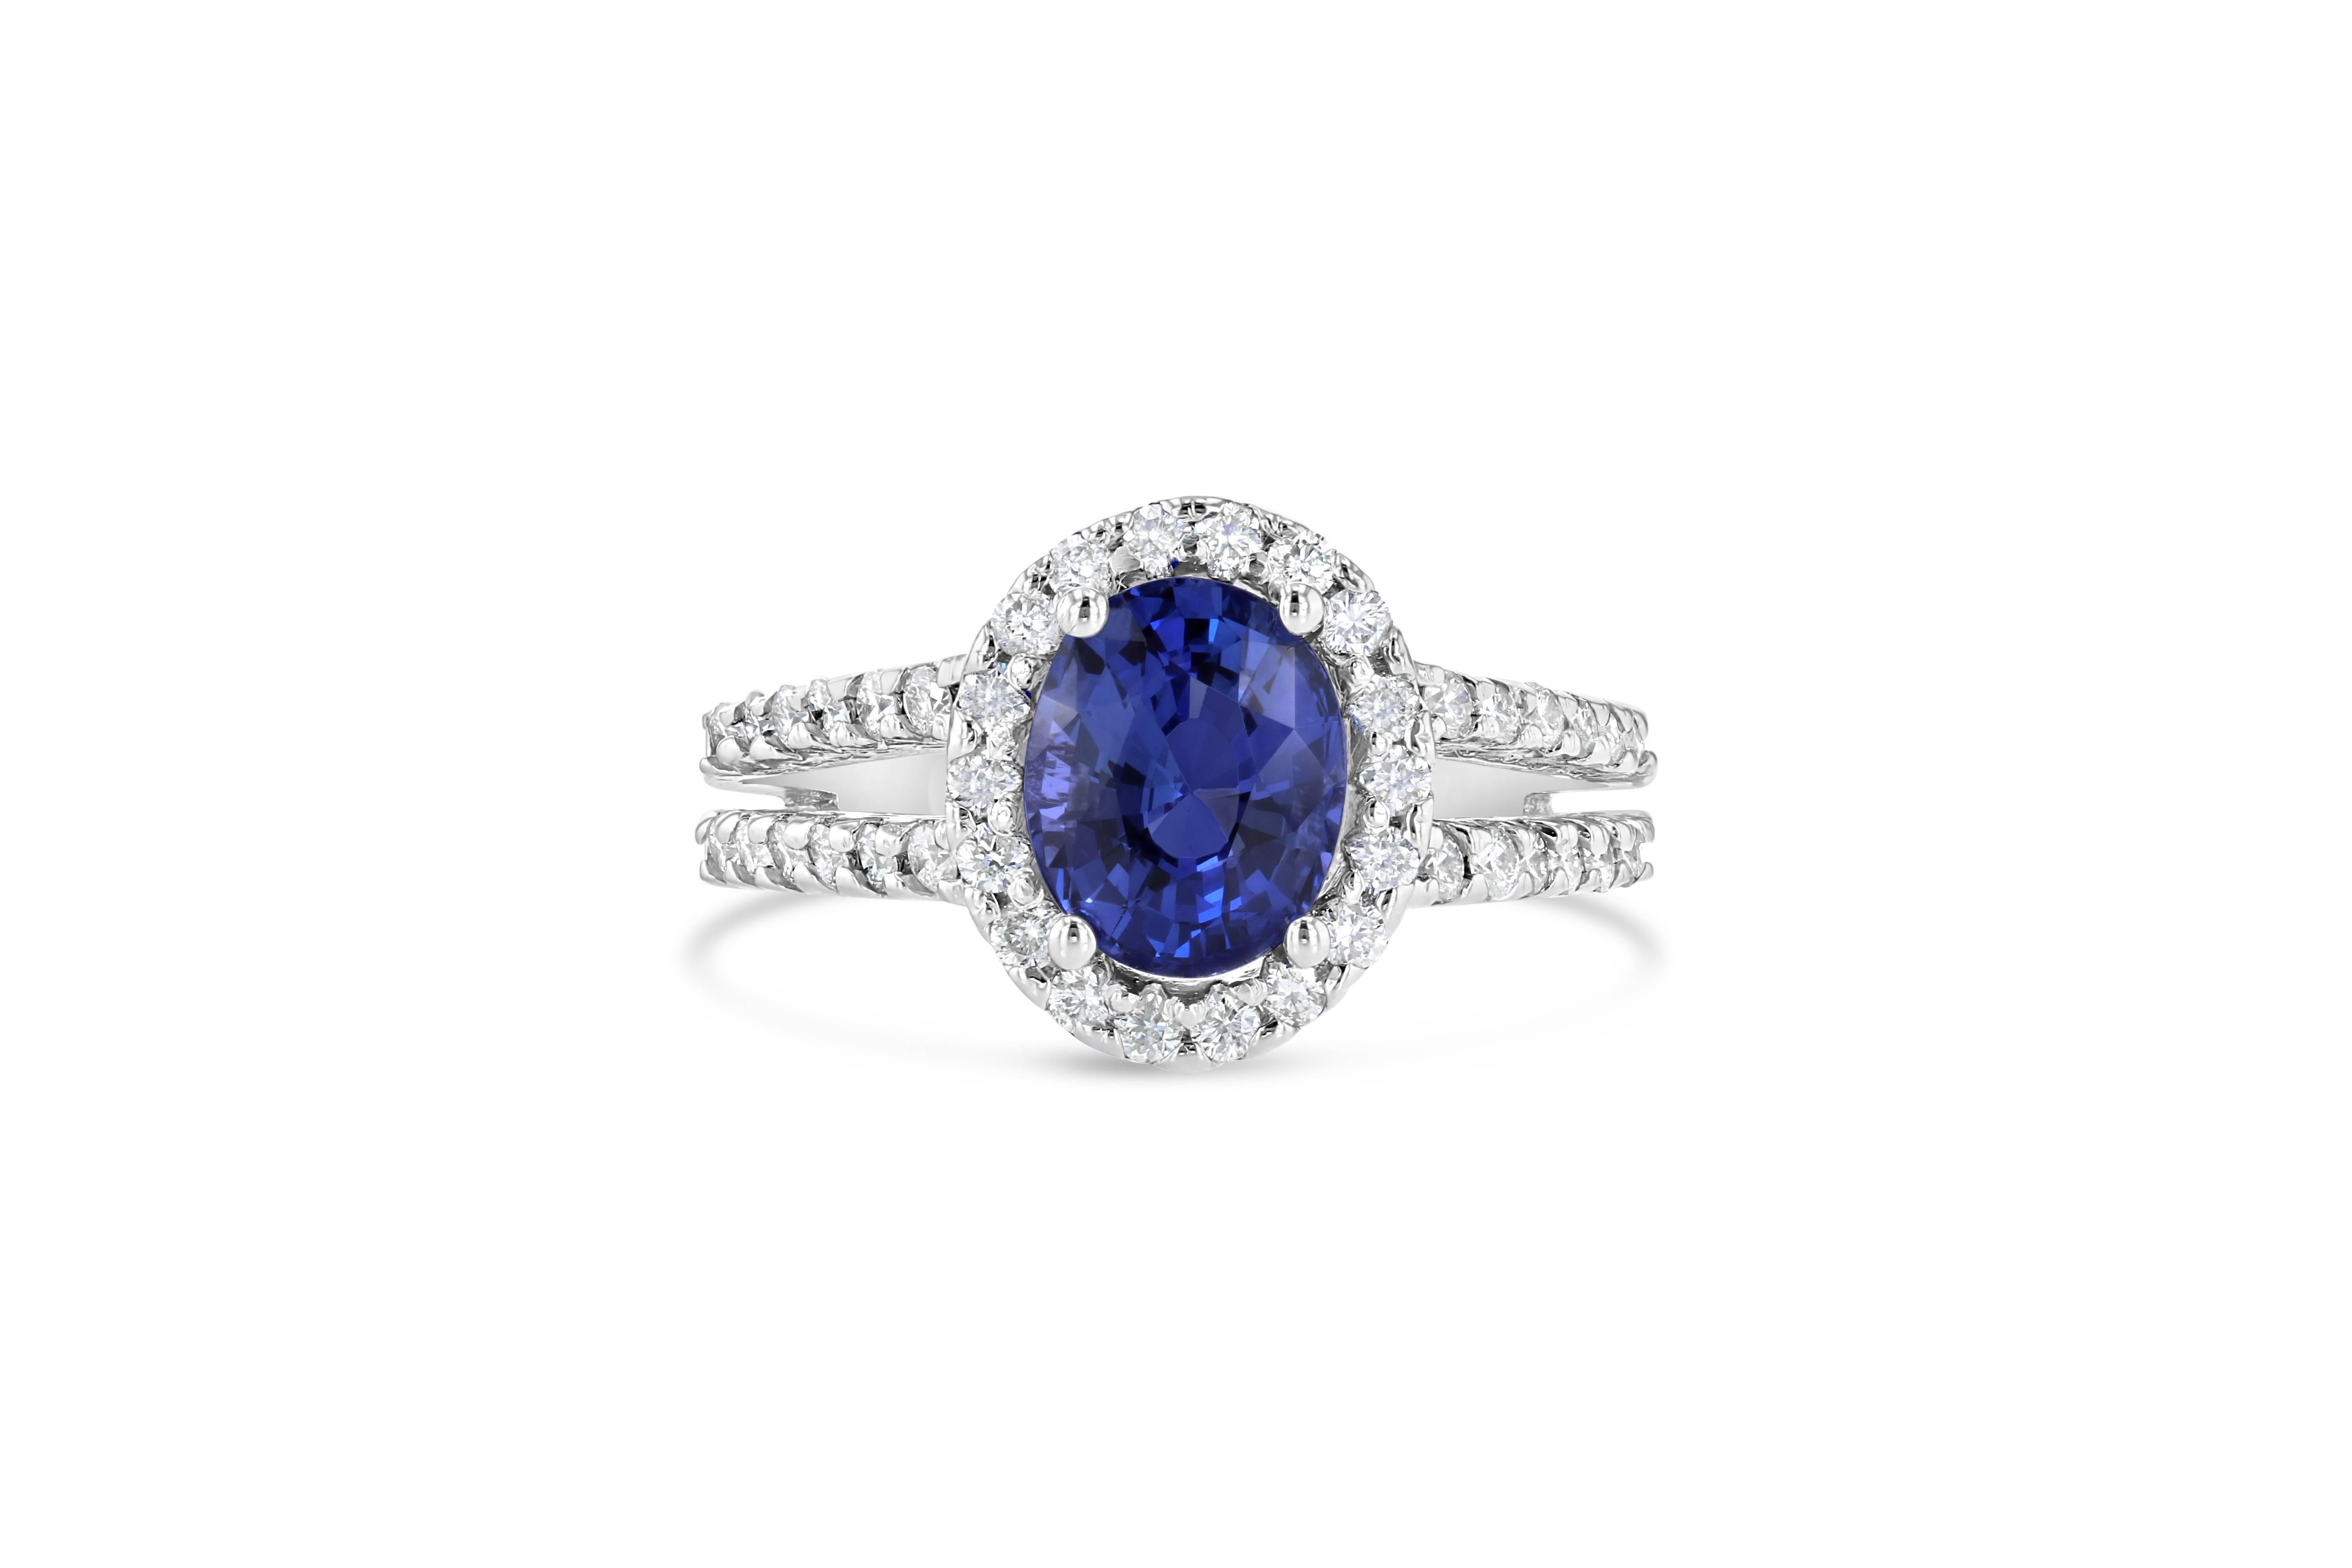 Beautiful Blue Sapphire and Diamond Ring!  This ring has a 2.62 carat Oval Cut Blue Sapphire in the center of the ring and is surrounded by a Halo of 42 Round Cut Diamonds that weigh 0.62 carats.  The clarity and color is SI2/F.  This ring is casted